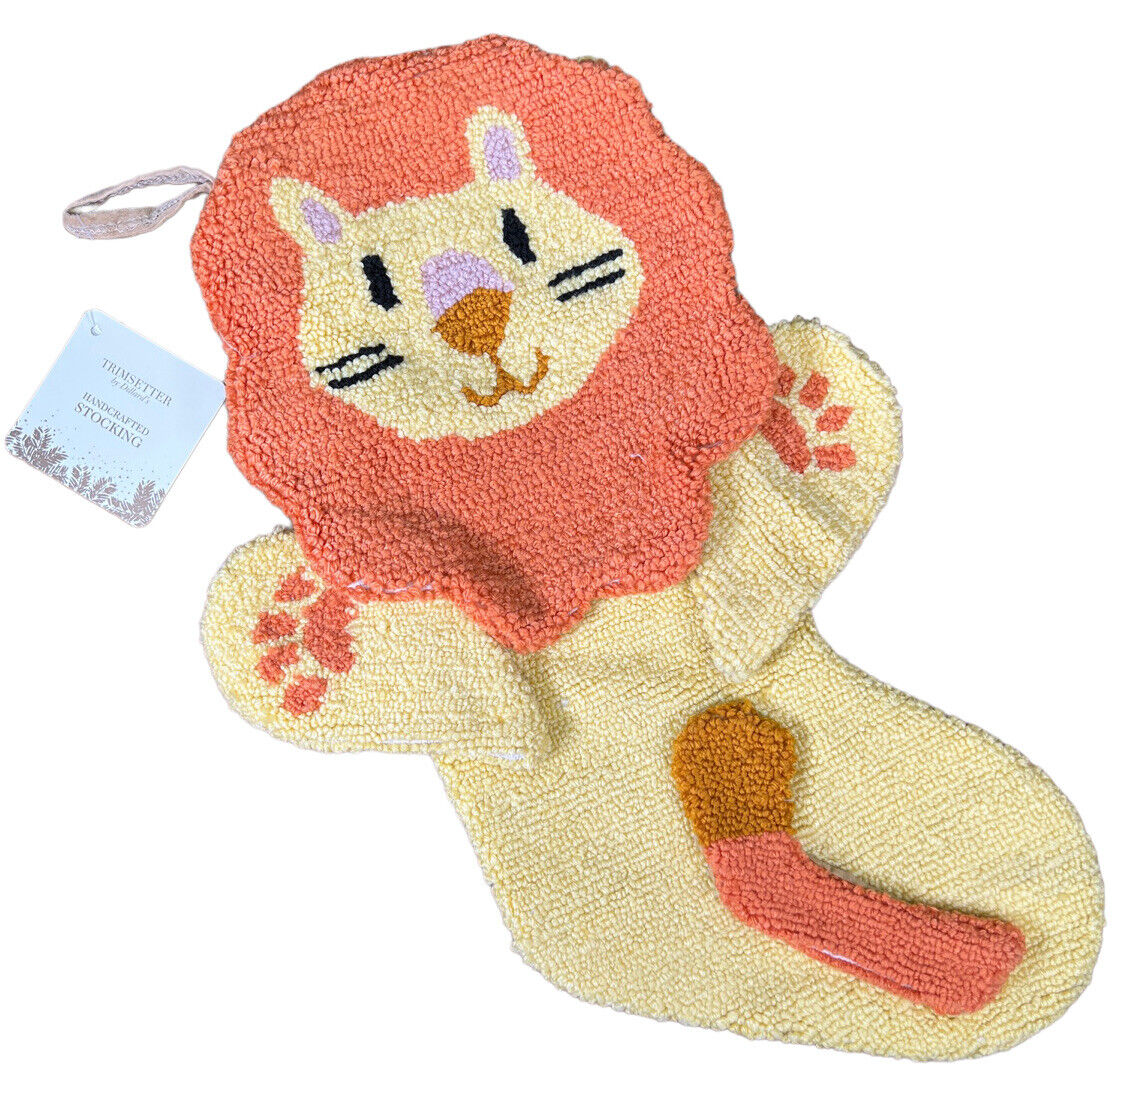 TRIMSETTER by DIllards Handcrafted Stocking LION Needlpoint